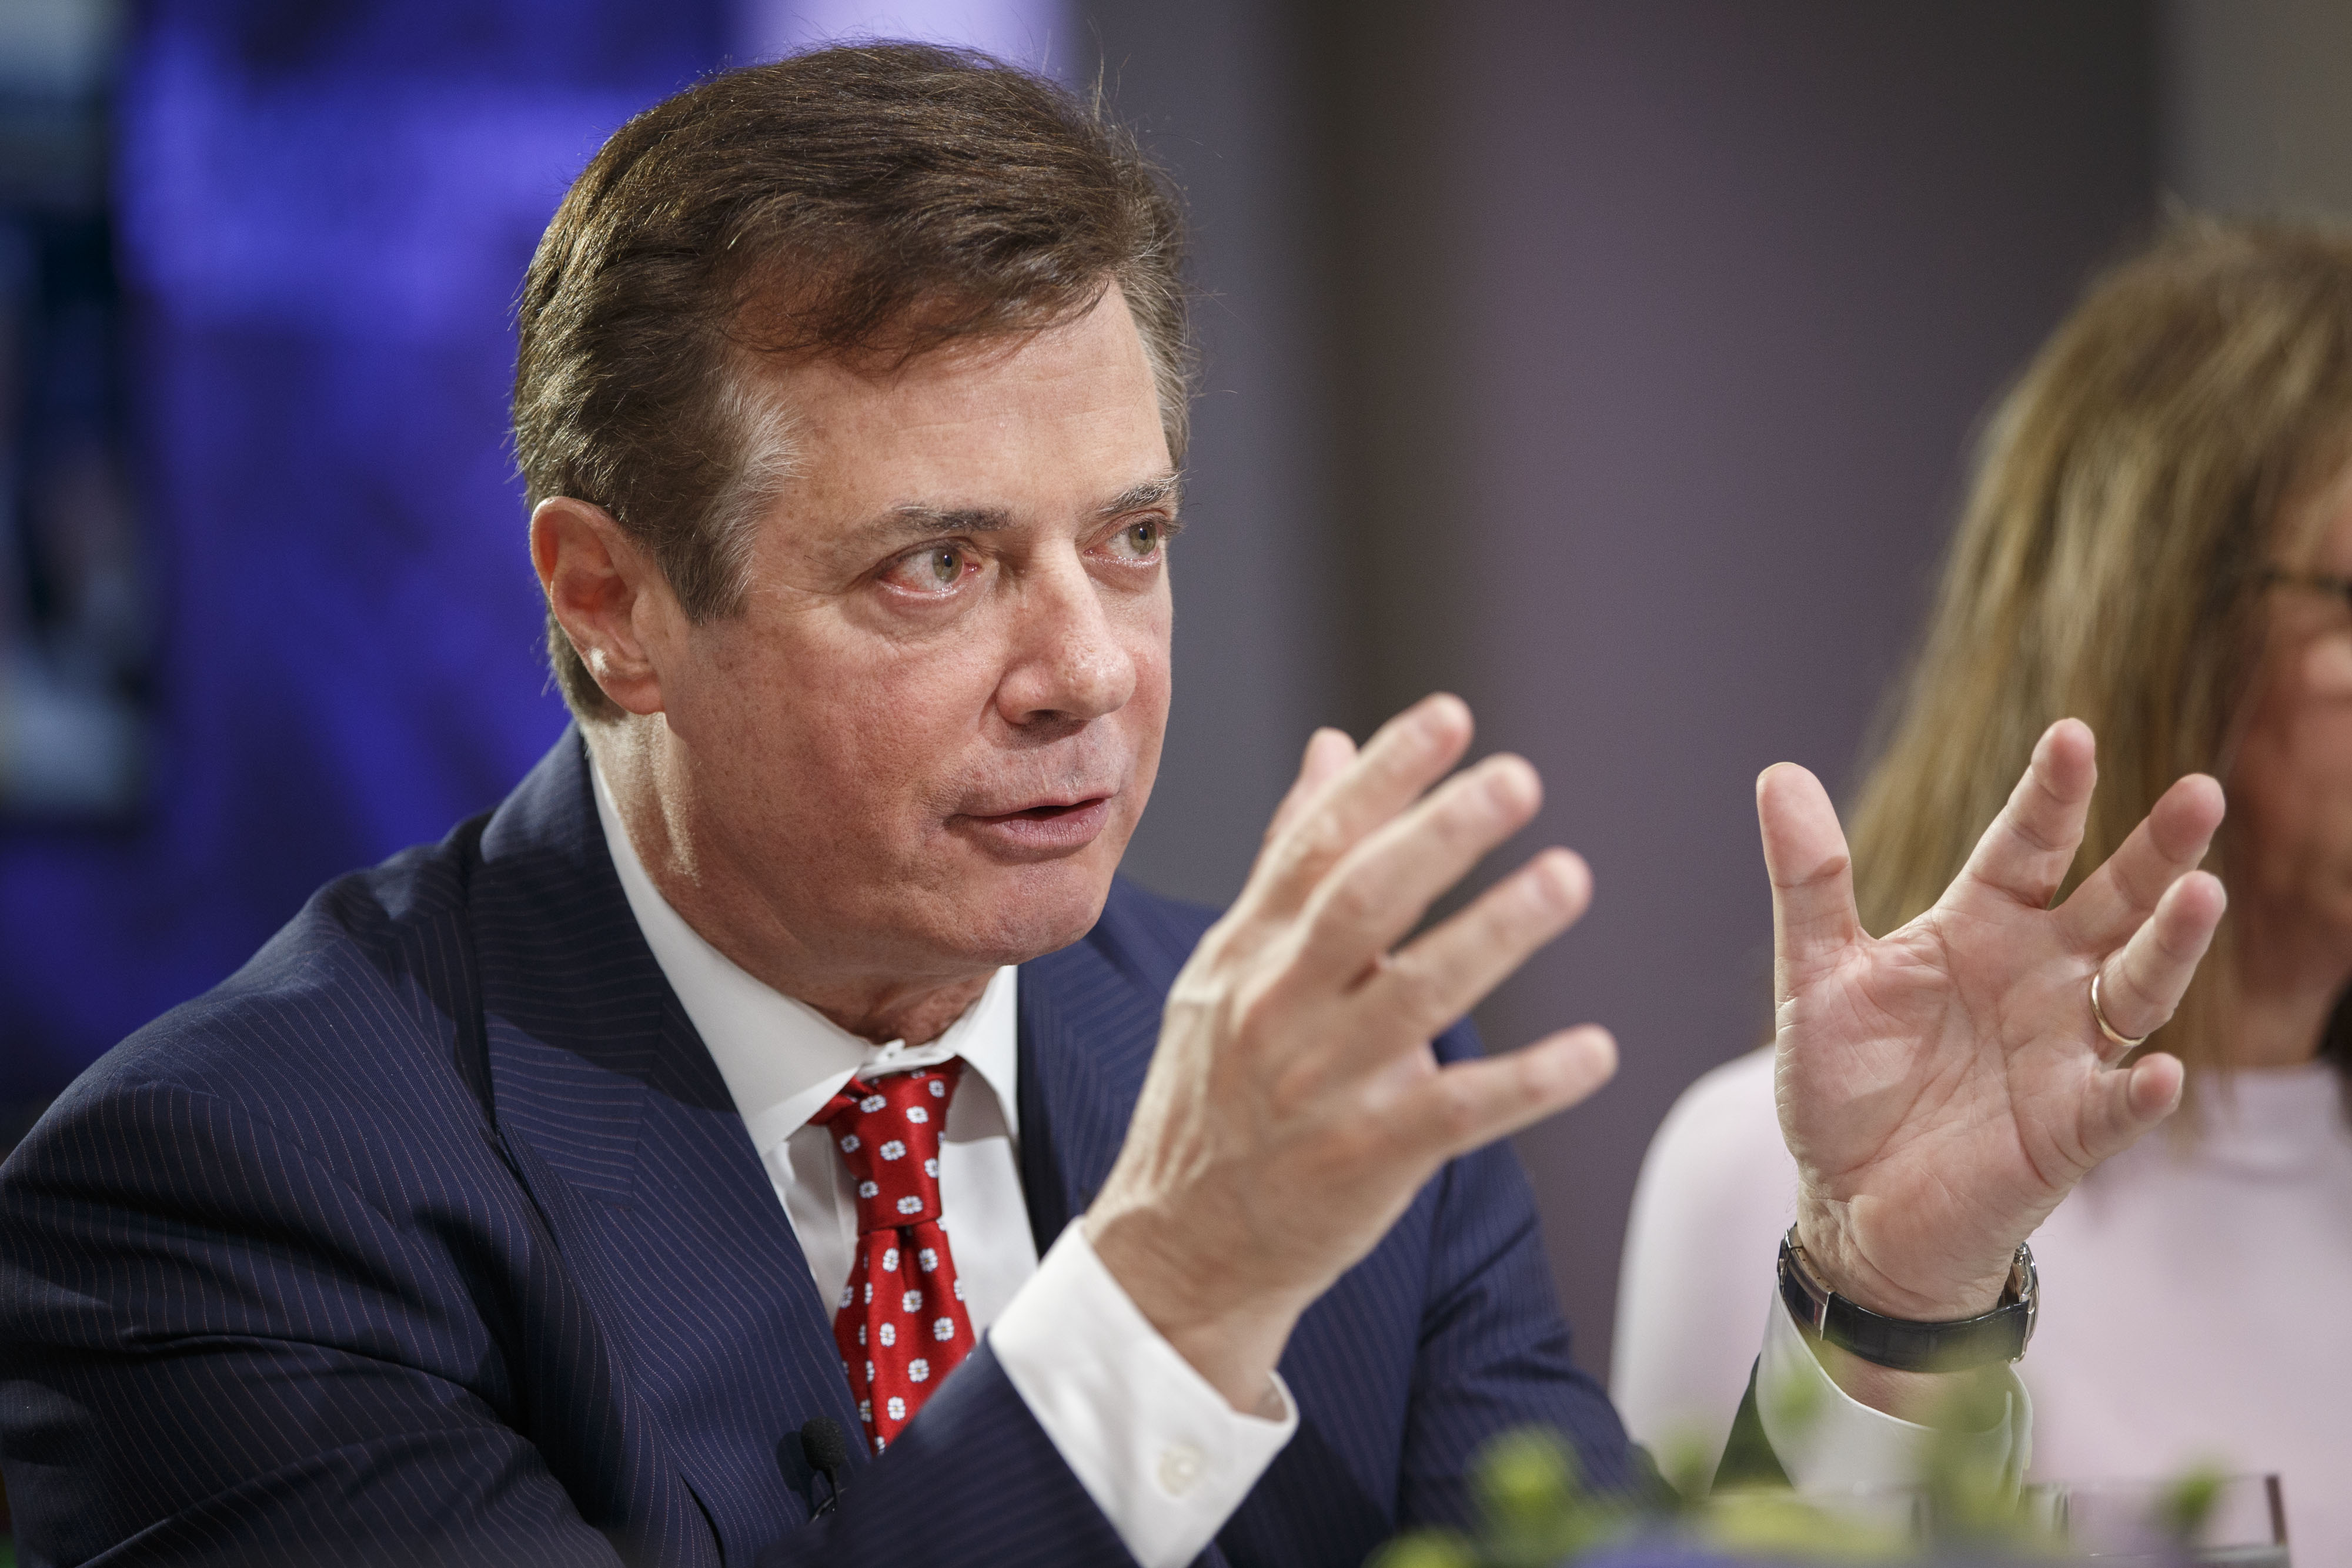 Paul Manafort, campaign manager for Republican Presidential Nominee Donald Trump, speaks during a Bloomberg Politics interview on the sidelines of the Republican National Convention (RNC) in Cleveland, Ohio, on July 18, 2016. (Patrick Fallon—Bloomberg/Getty Images)